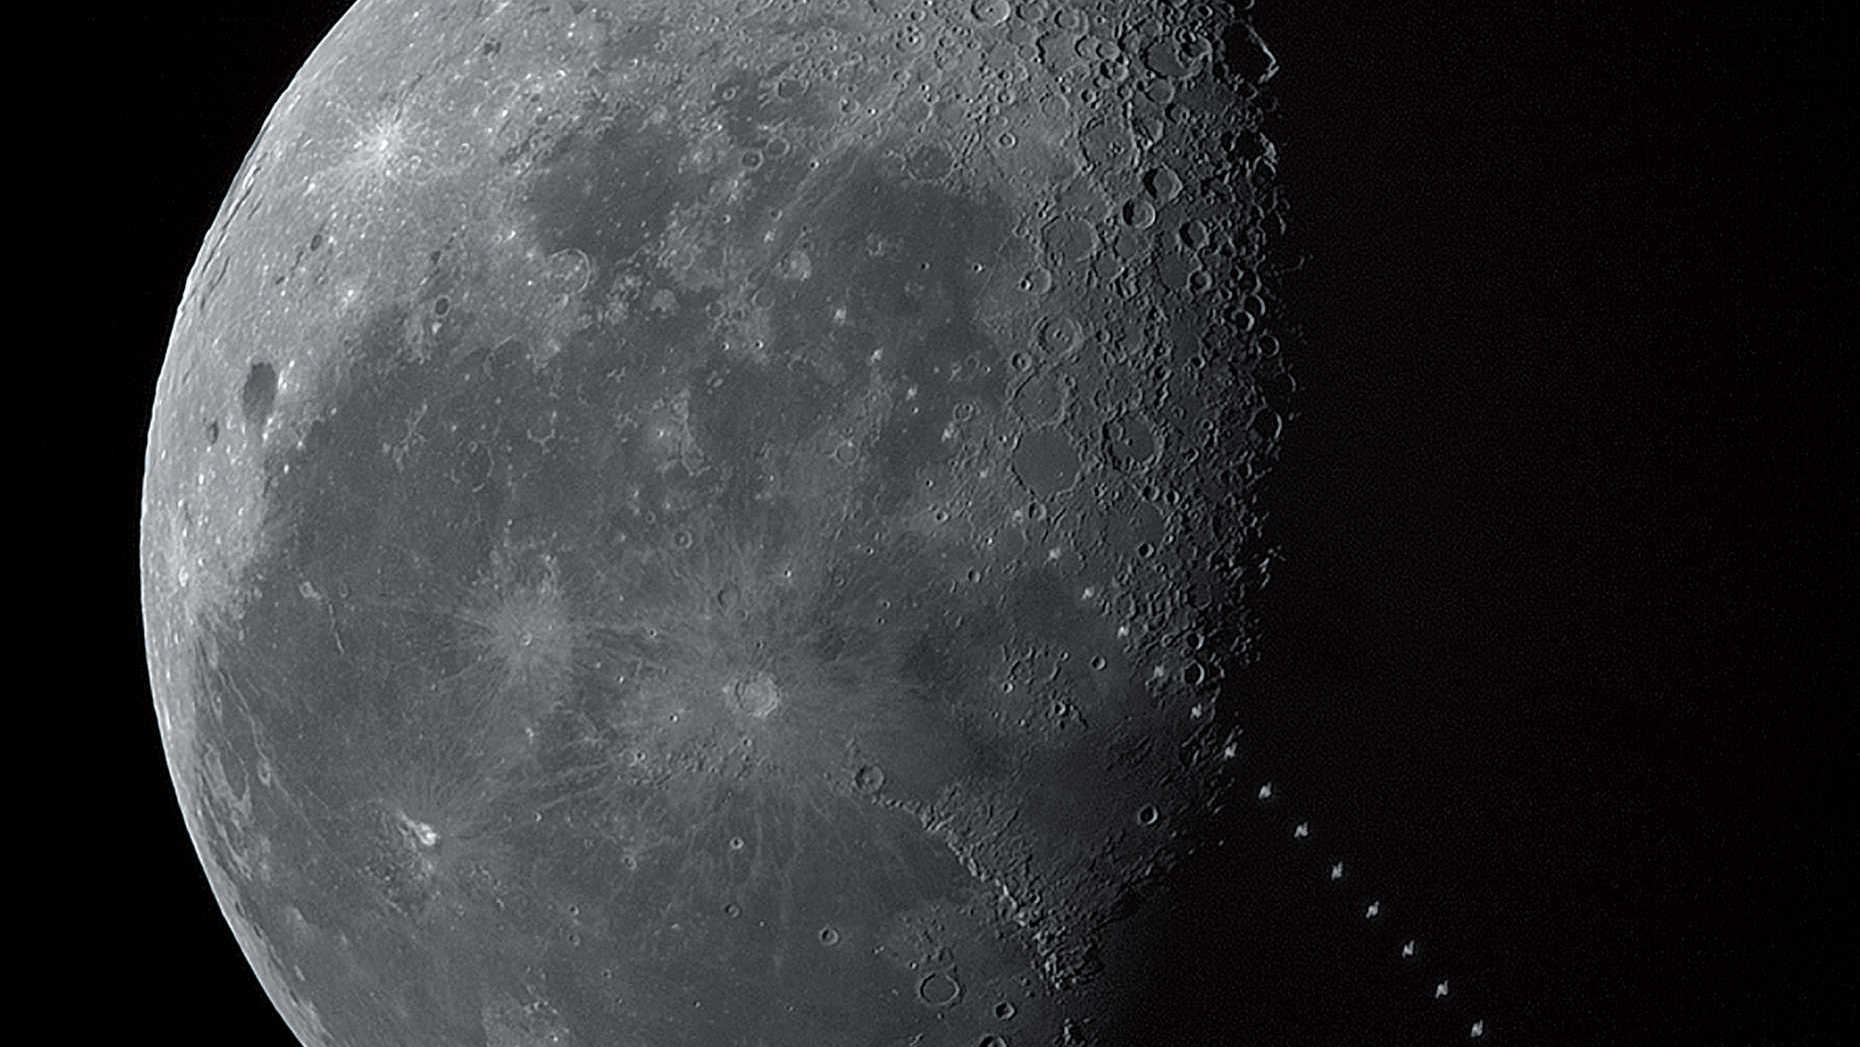 In the early morning hours of 17.5.2017, on a clear early summer morning, the transit of the International Space Station (ISS) in front of the waning Moon over Todtnau in the southern Black Forest was captured: the transit took place at 8:05:49 CEST, when the Moon was 19.4 degrees above the SSW horizon. The distance between the magnitude 2.3 ISS and the observation site was 1,016.7km, so the transit took 1.2 seconds and the space station seemed relatively small. The picture is a composite of 51 images. U. Dittler